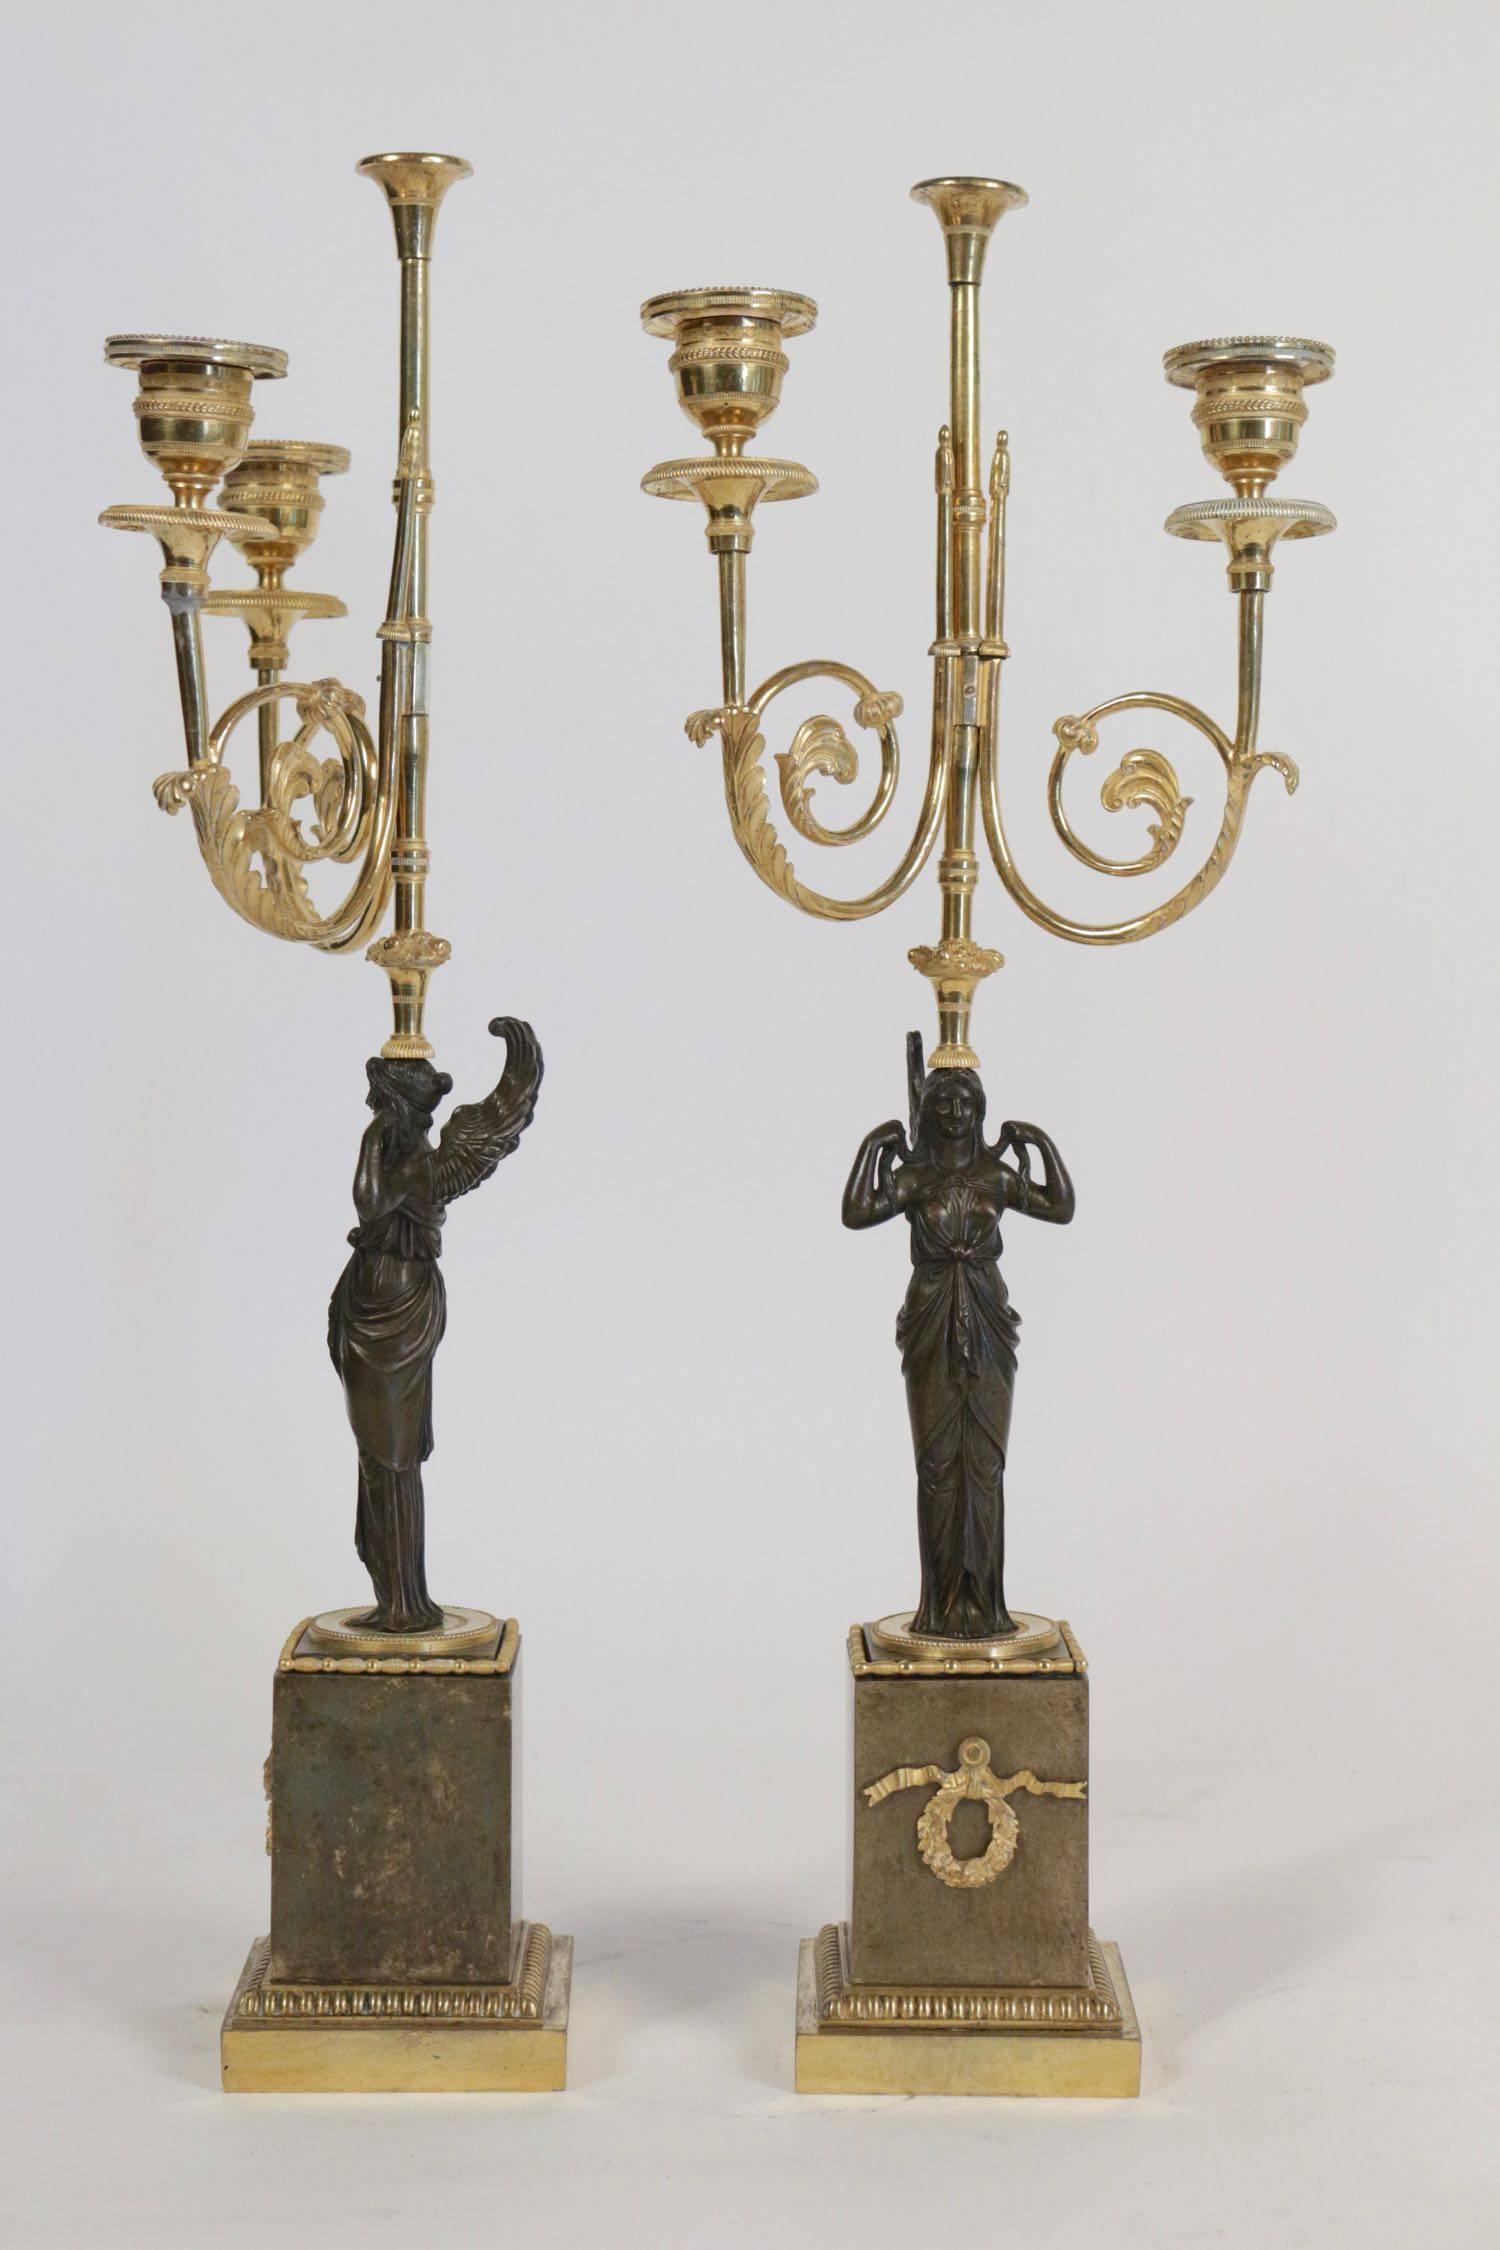 Pair of 18th century bronze candlesticks in gold gilt with marble base. 
Measures: 49cm tall x 18cm wide x 14cm deep.